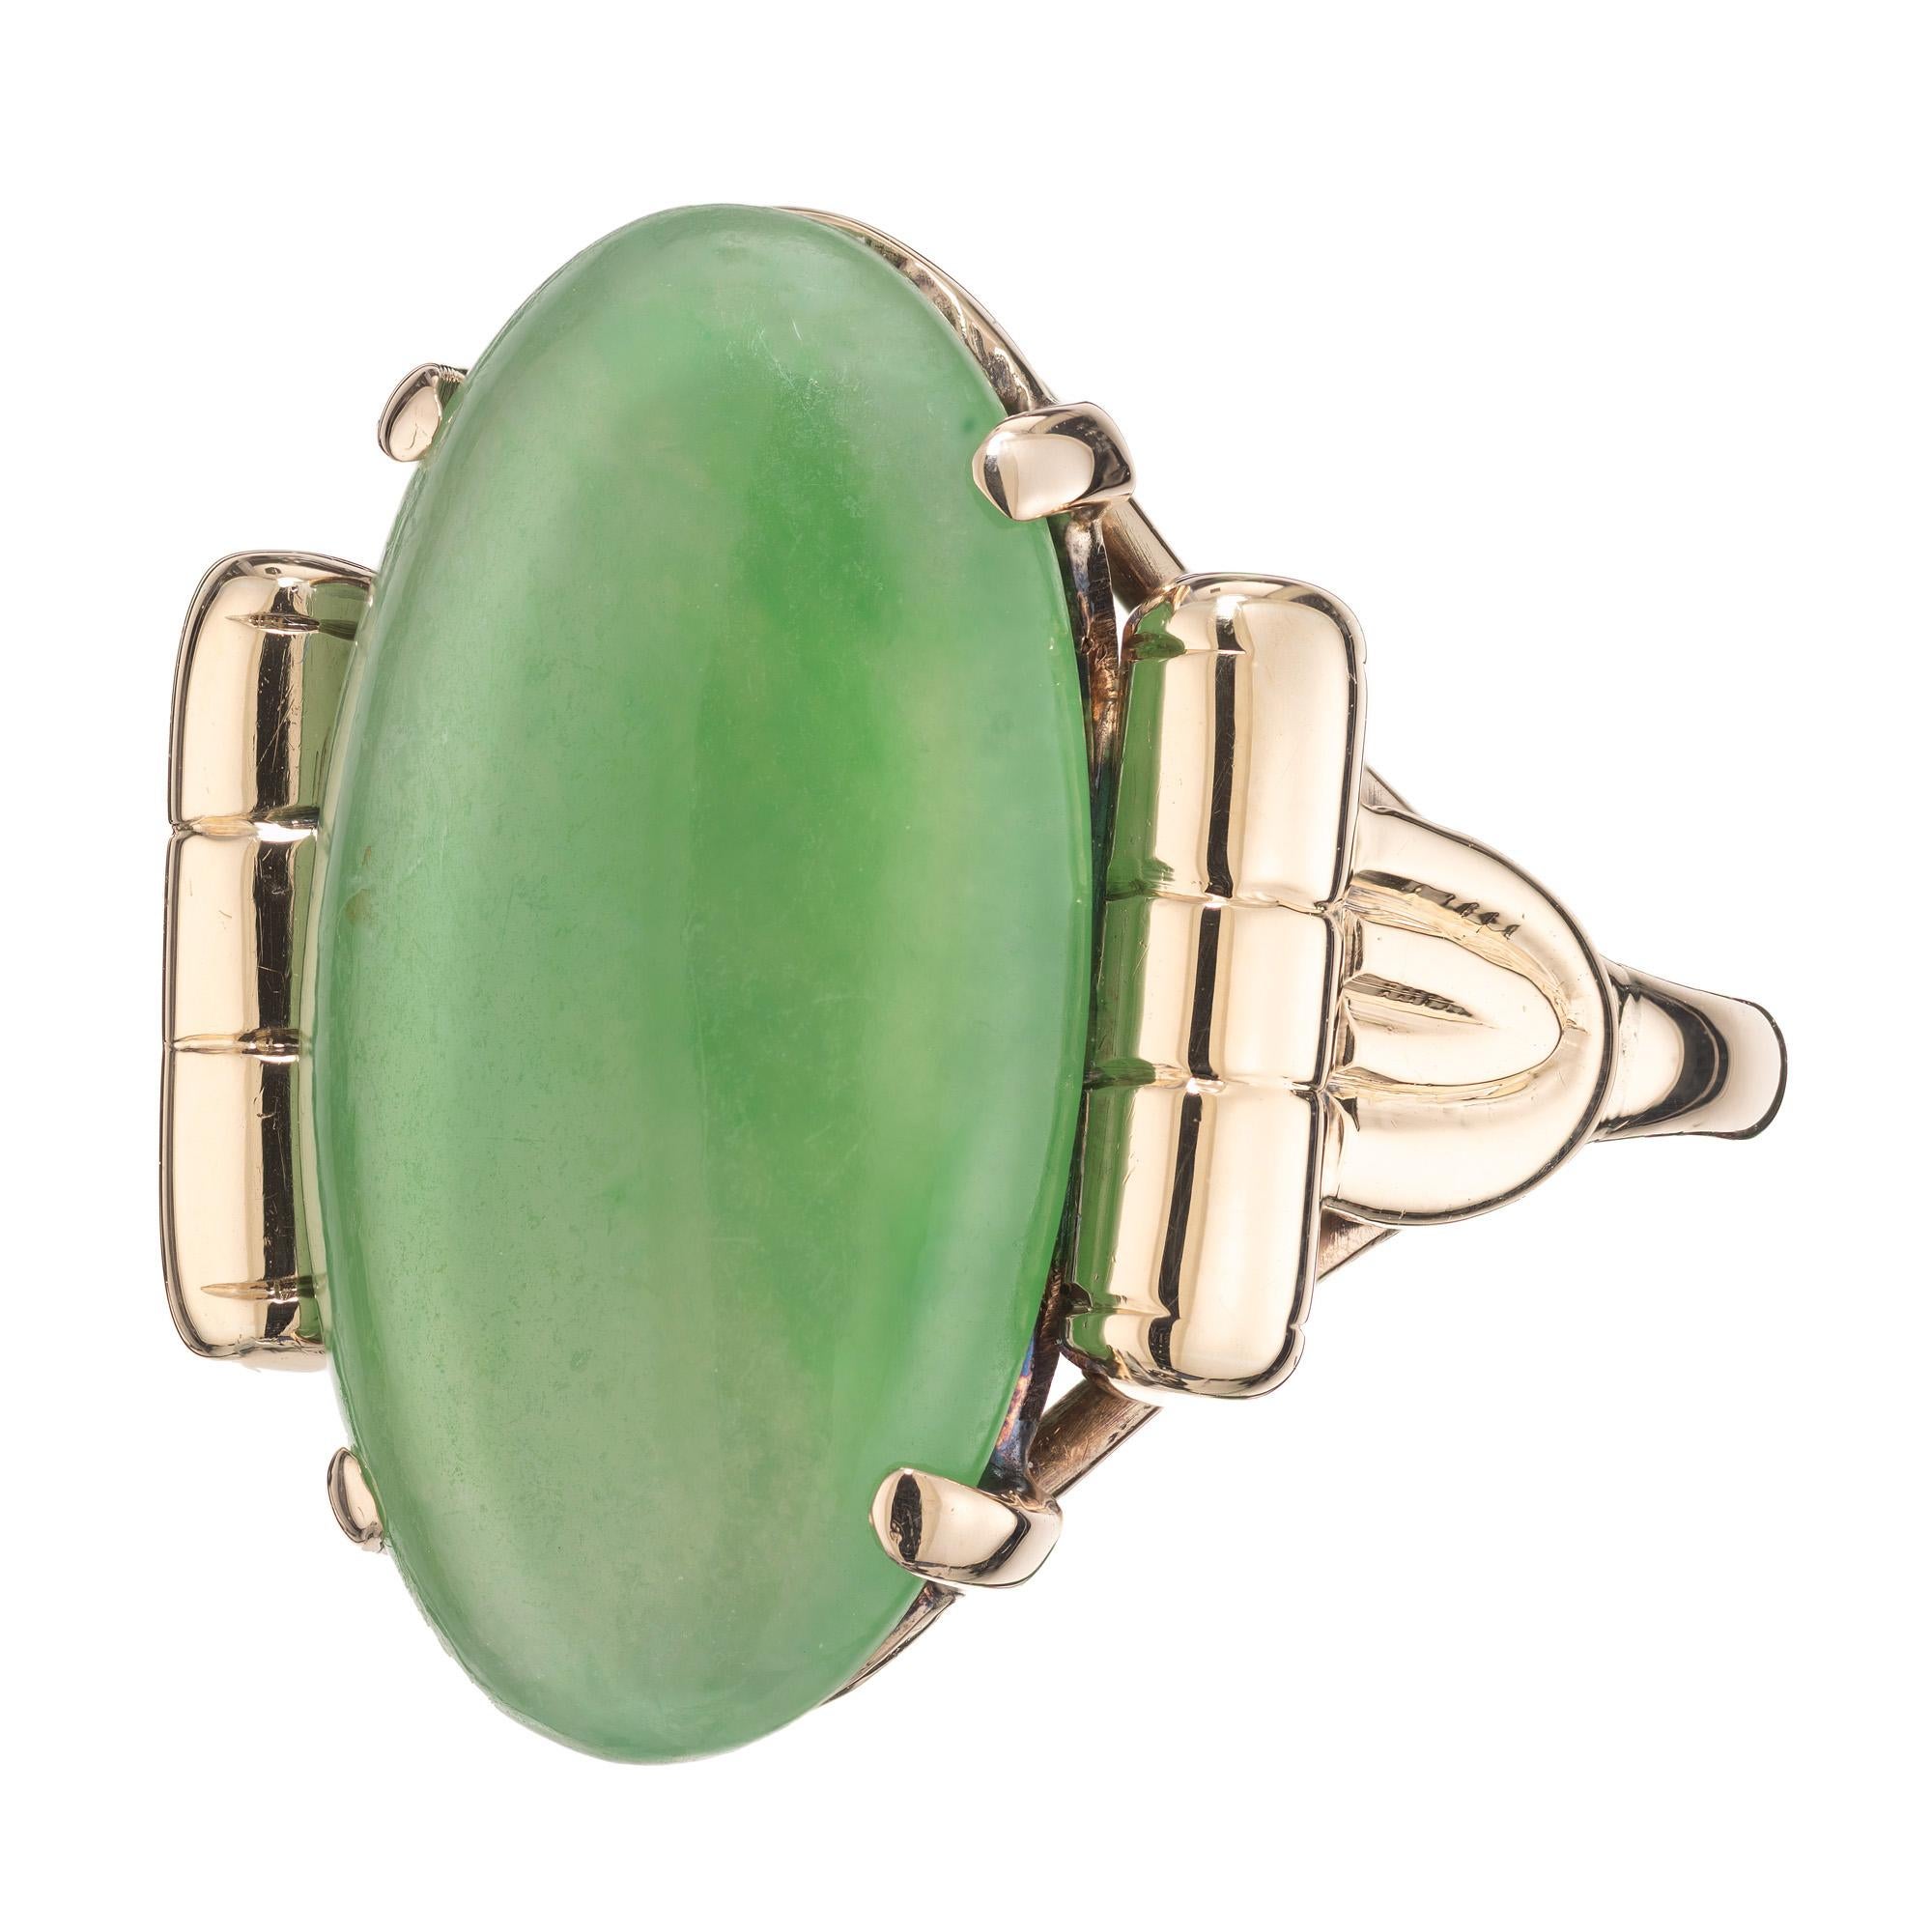 This 1950's mid-century 14k rose gold, GIA certified 9.5 carat single oval cabochon jade ring is a true marvel to behold. The stone is a stunning natural translucent A grade jade in a simple, but detailed mounting that is sure to be a statement